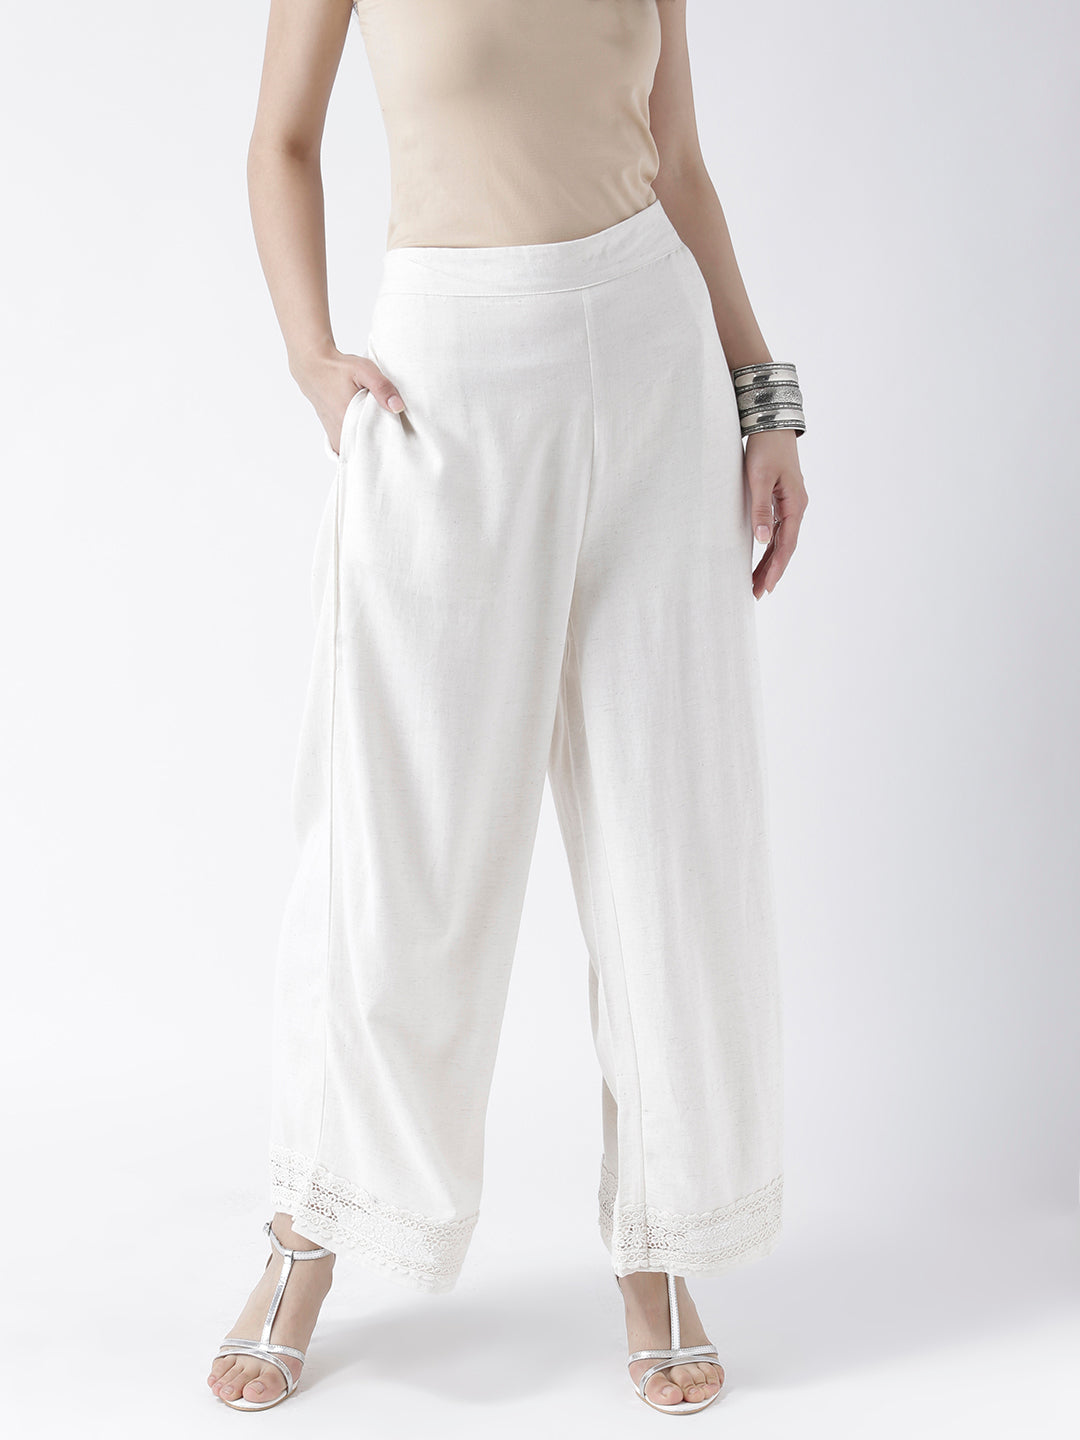 Off white straight pants with scalloped embroidery at bottom hem – Kora  India